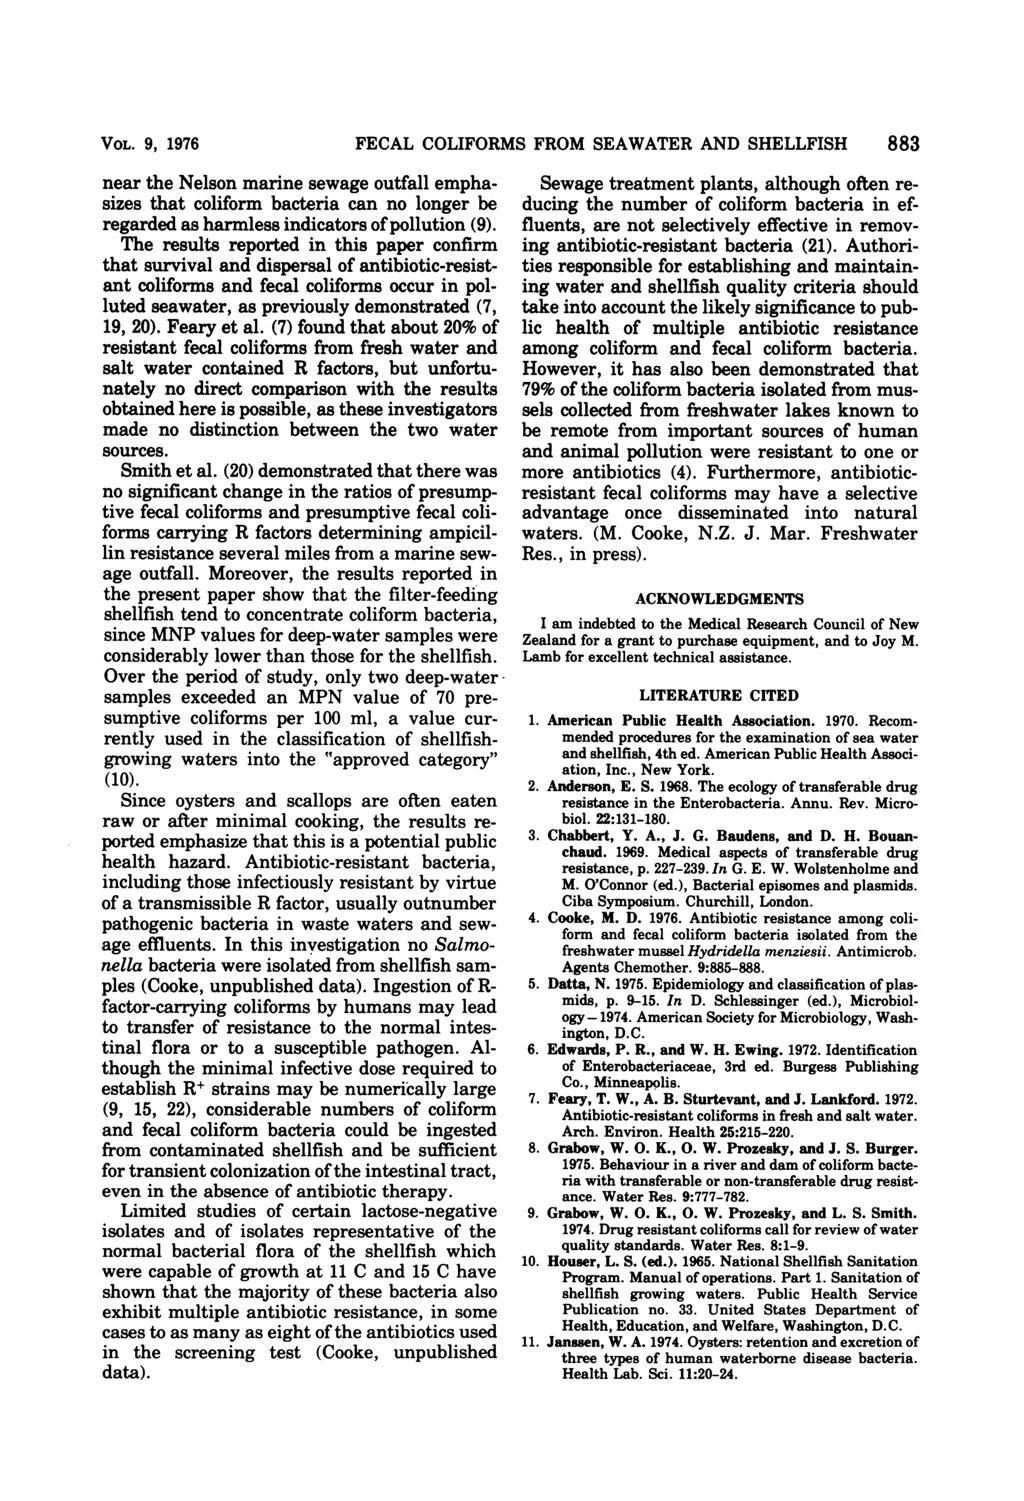 VOL. 9, 1976 ner the Nelson mrine sewge outfll emphsizes tht coliform bcteri cn no longer be regrded s hrmless indictors ofpollution (9).